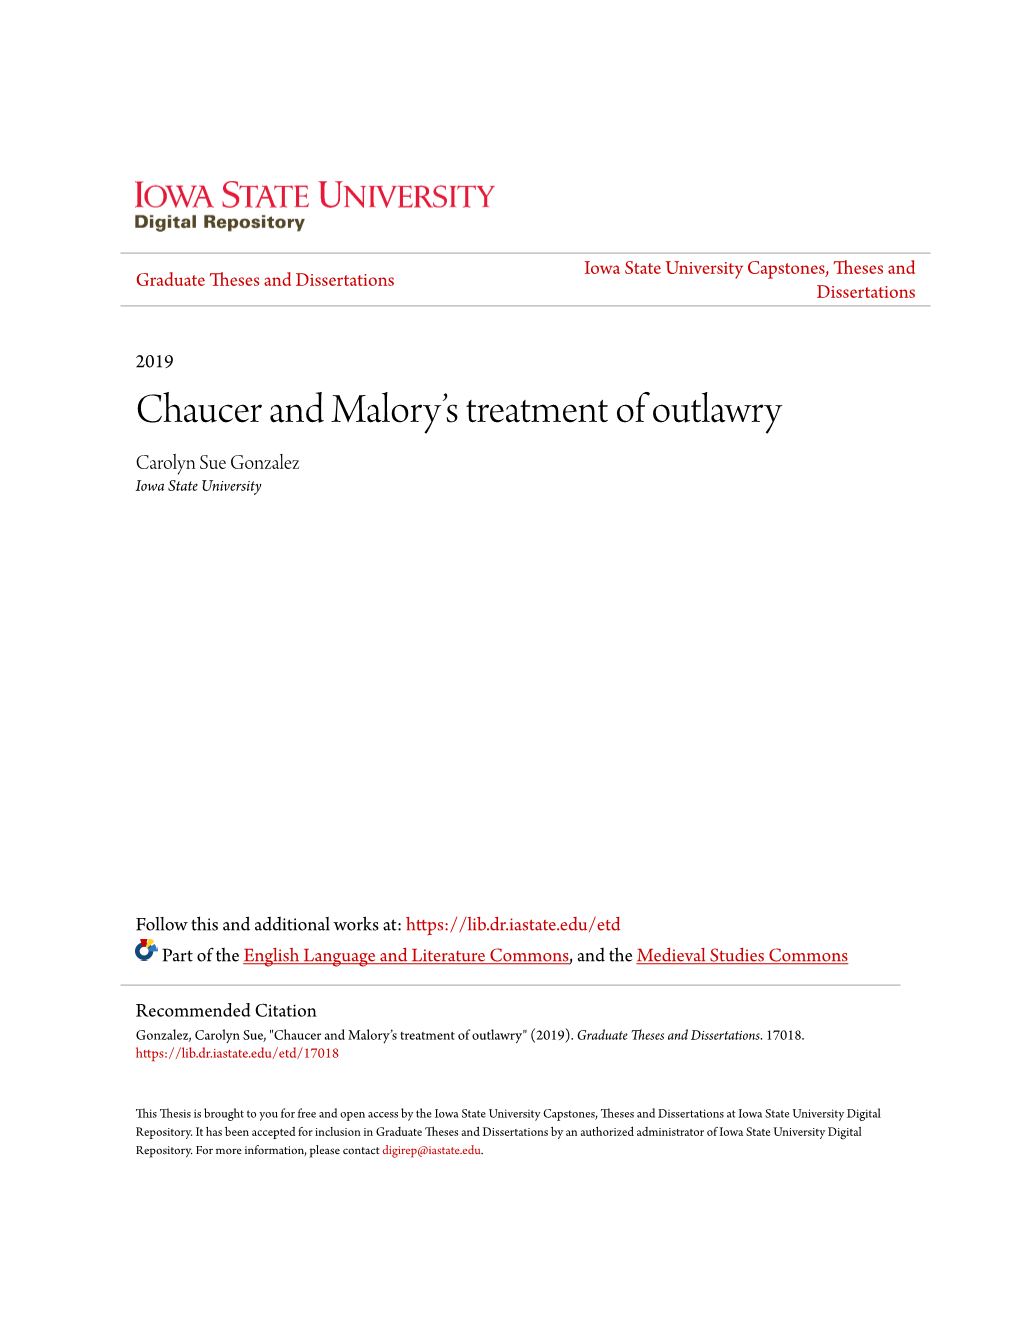 Chaucer and Malory's Treatment of Outlawry